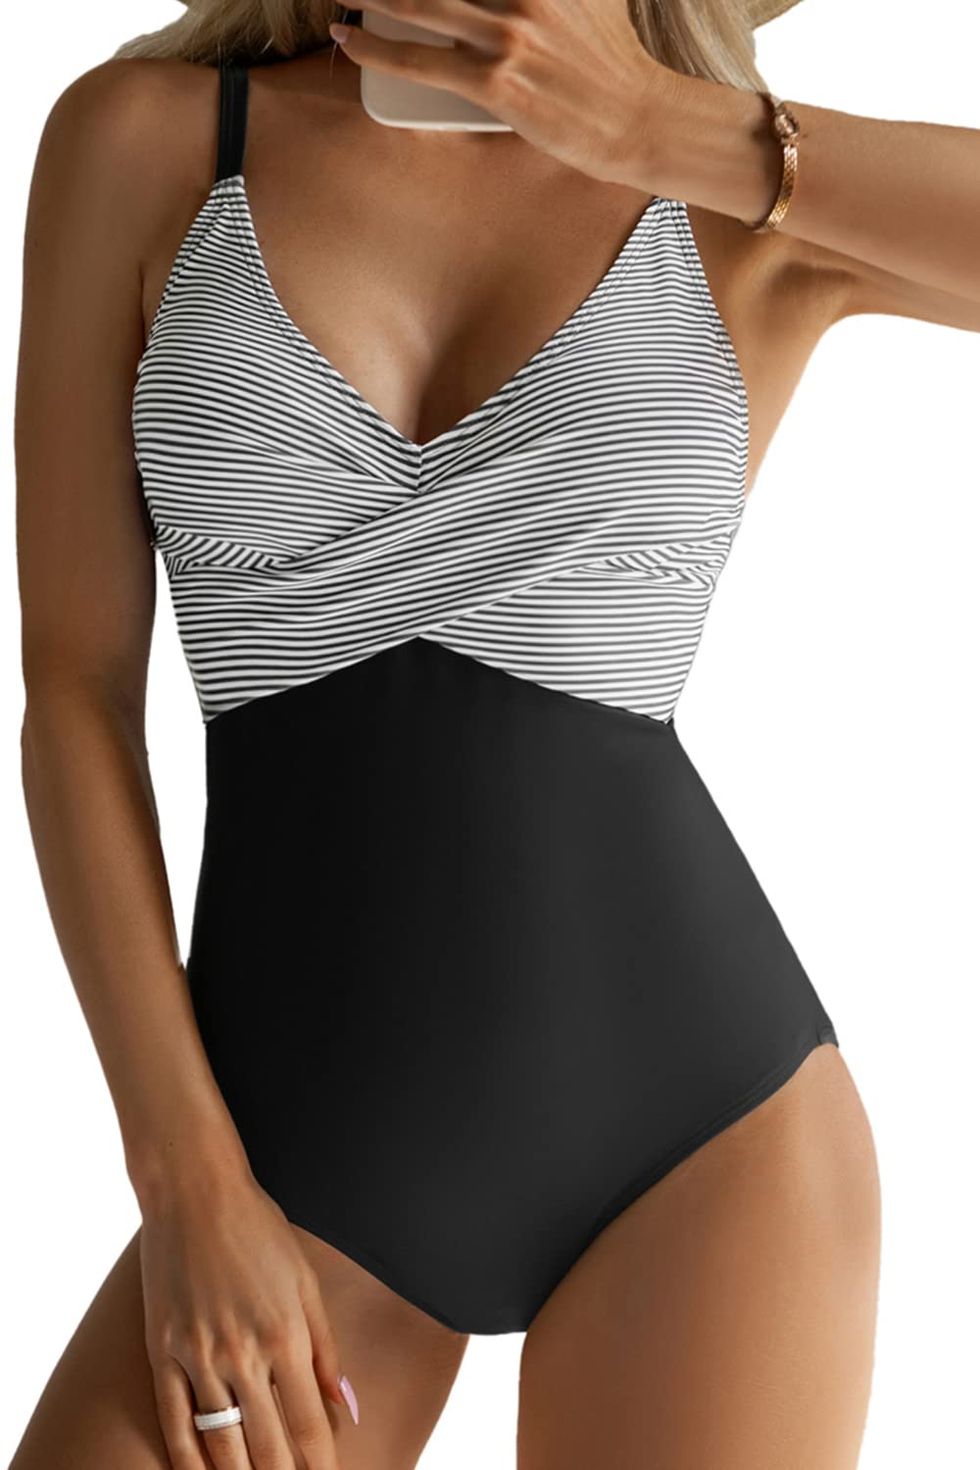 W YOU DI AN Women's Swimsuits One Piece Tummy Control Front Cross